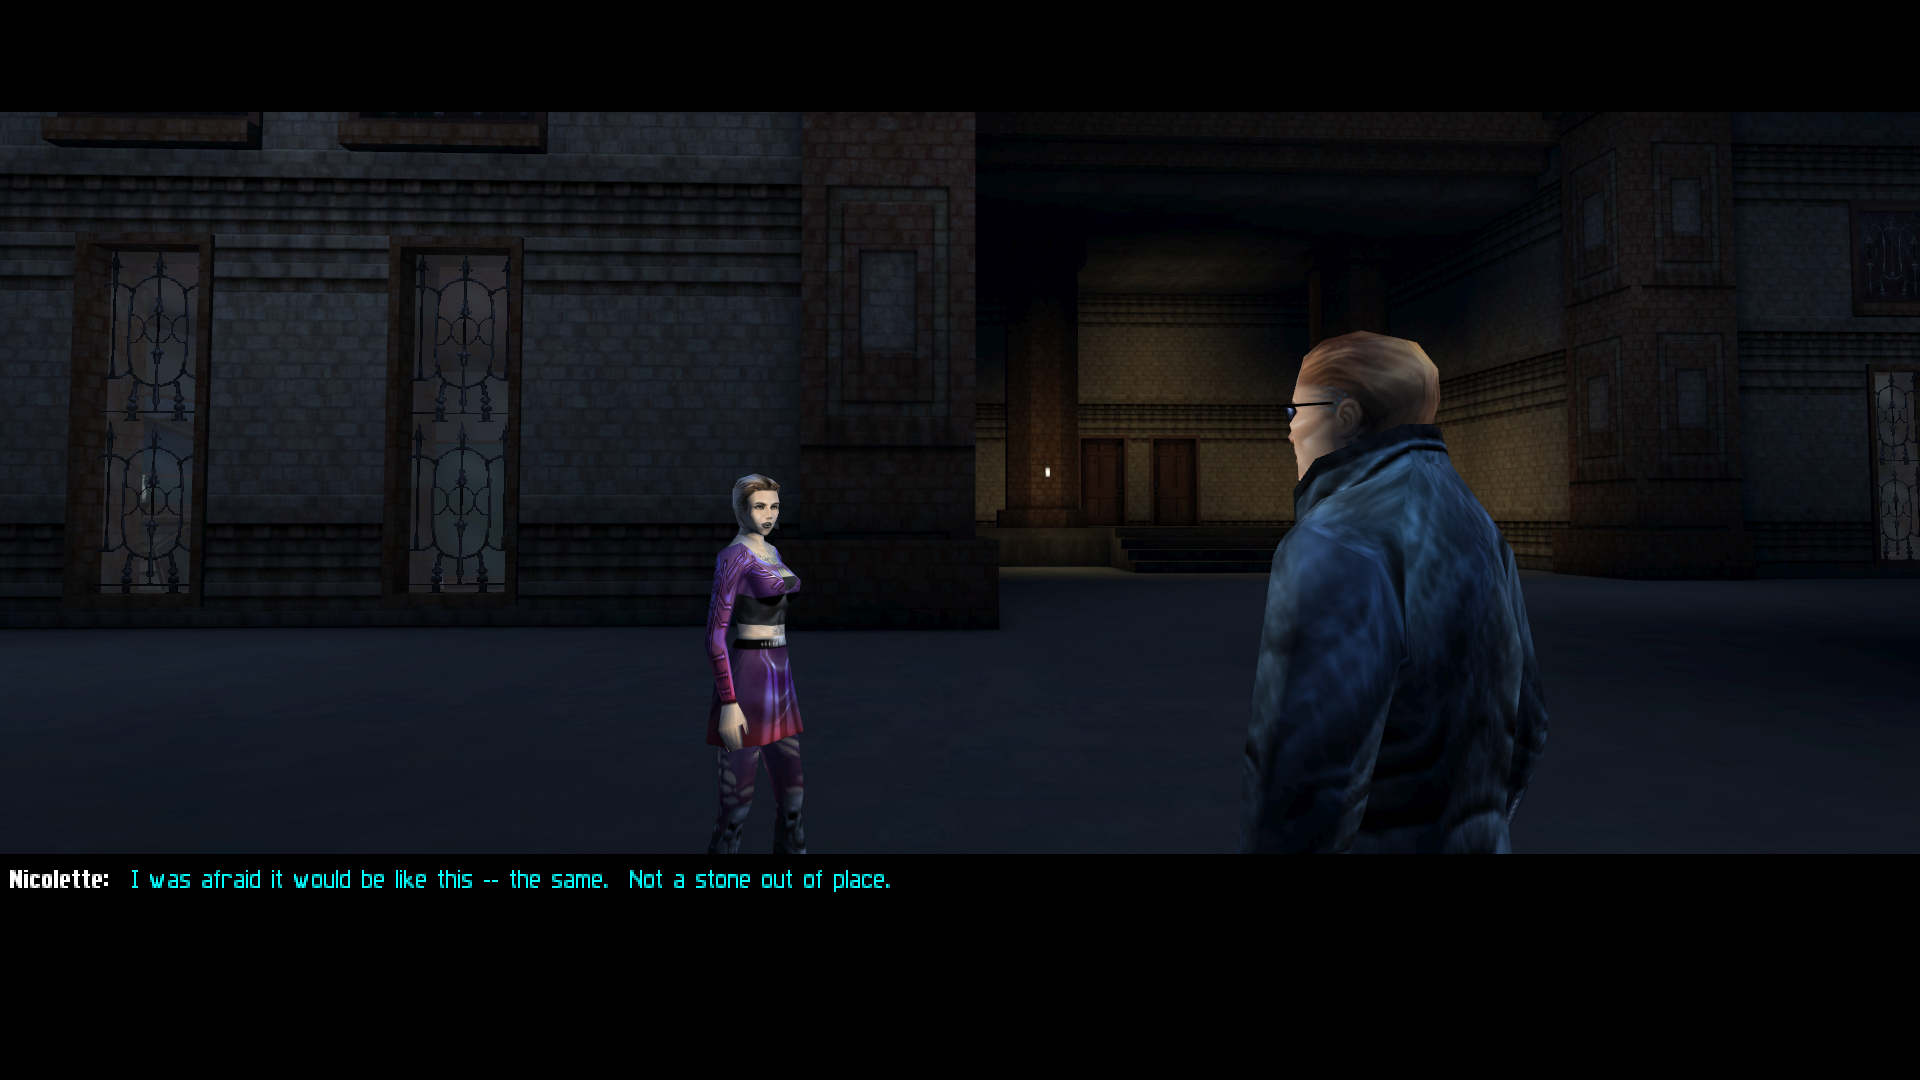 Screenshot of the game. A woman in purple chats with a man in a blue coat as they stand in the street.